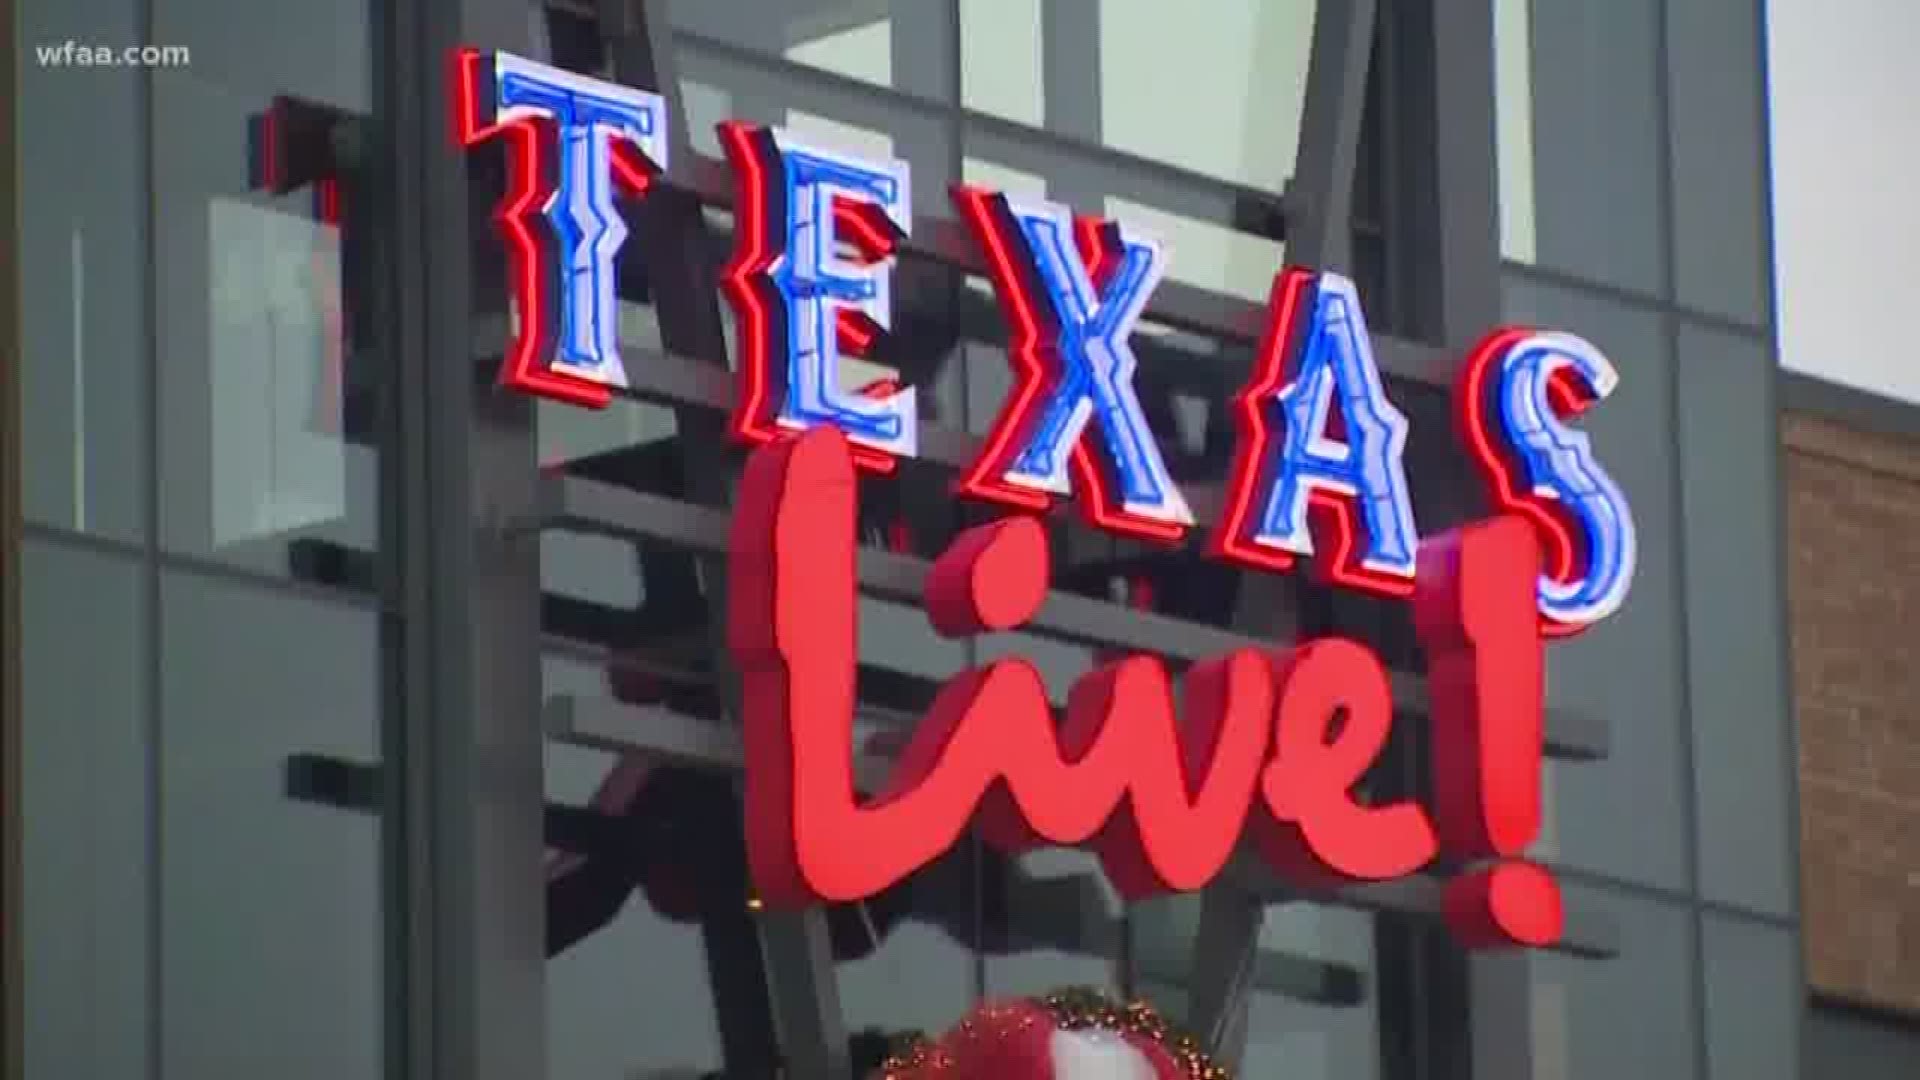 One of the larger venues is Texas Live! in Arlington.